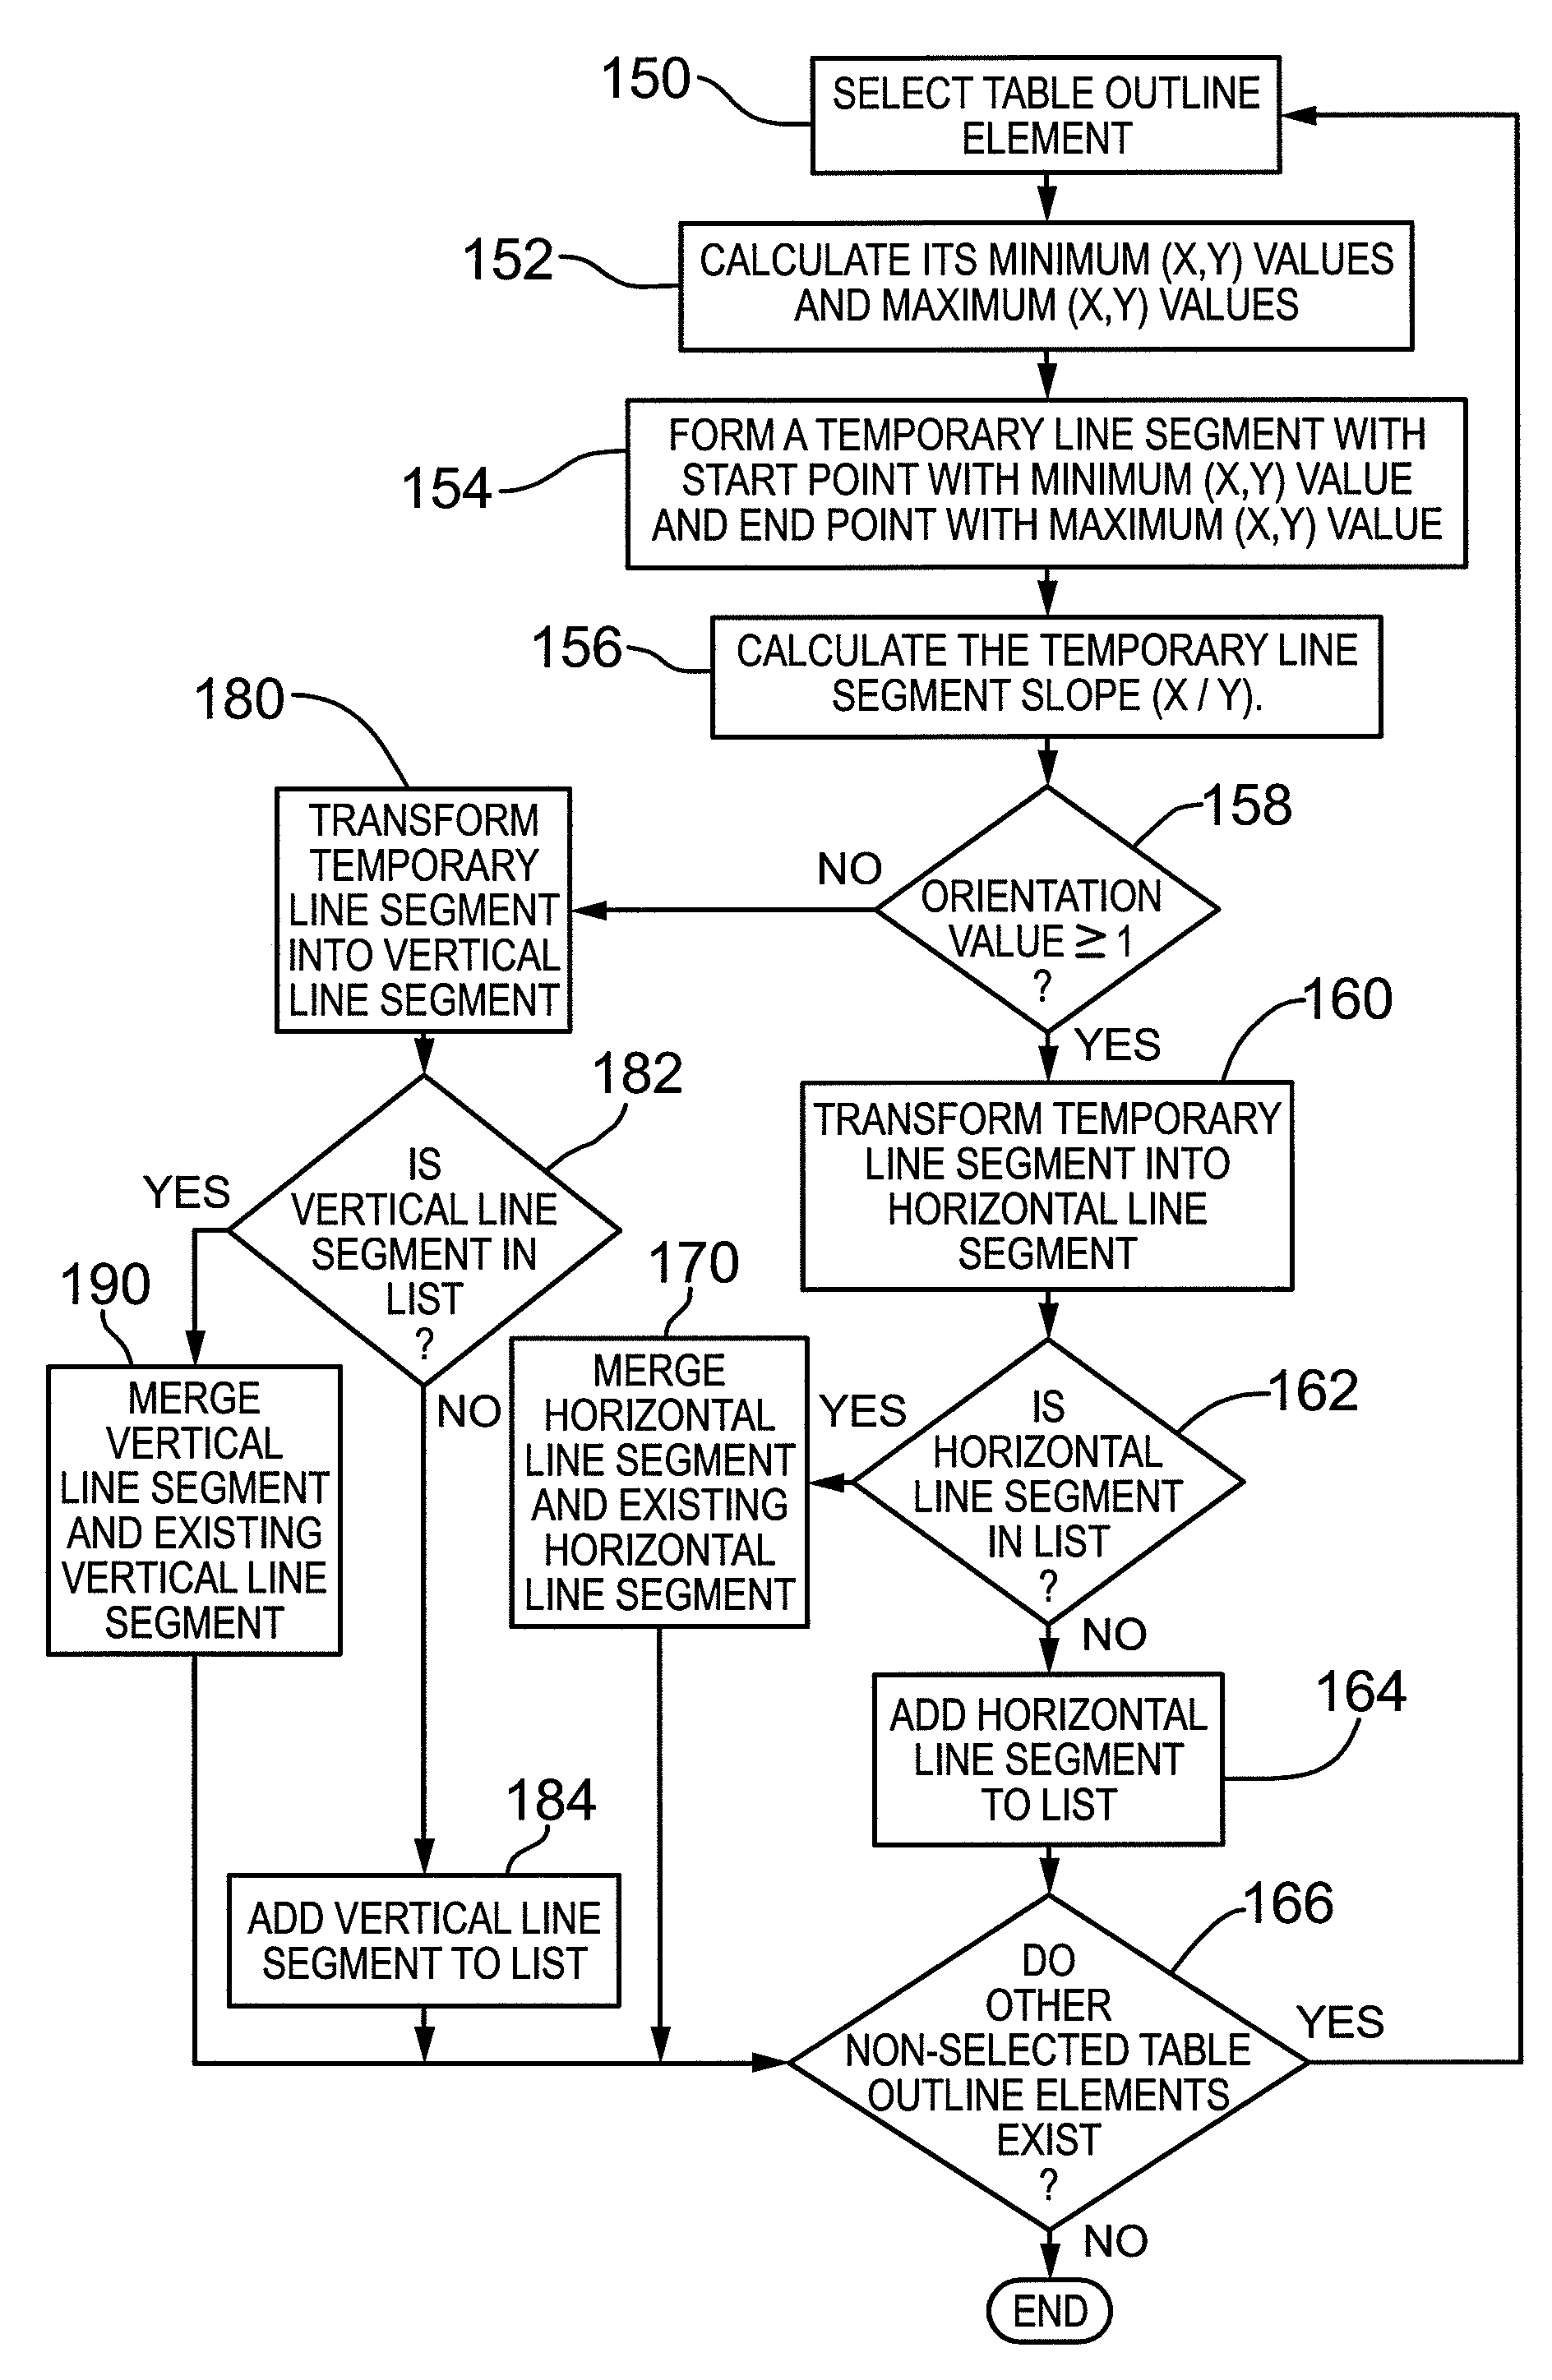 Method and tool for recognizing a hand-drawn table